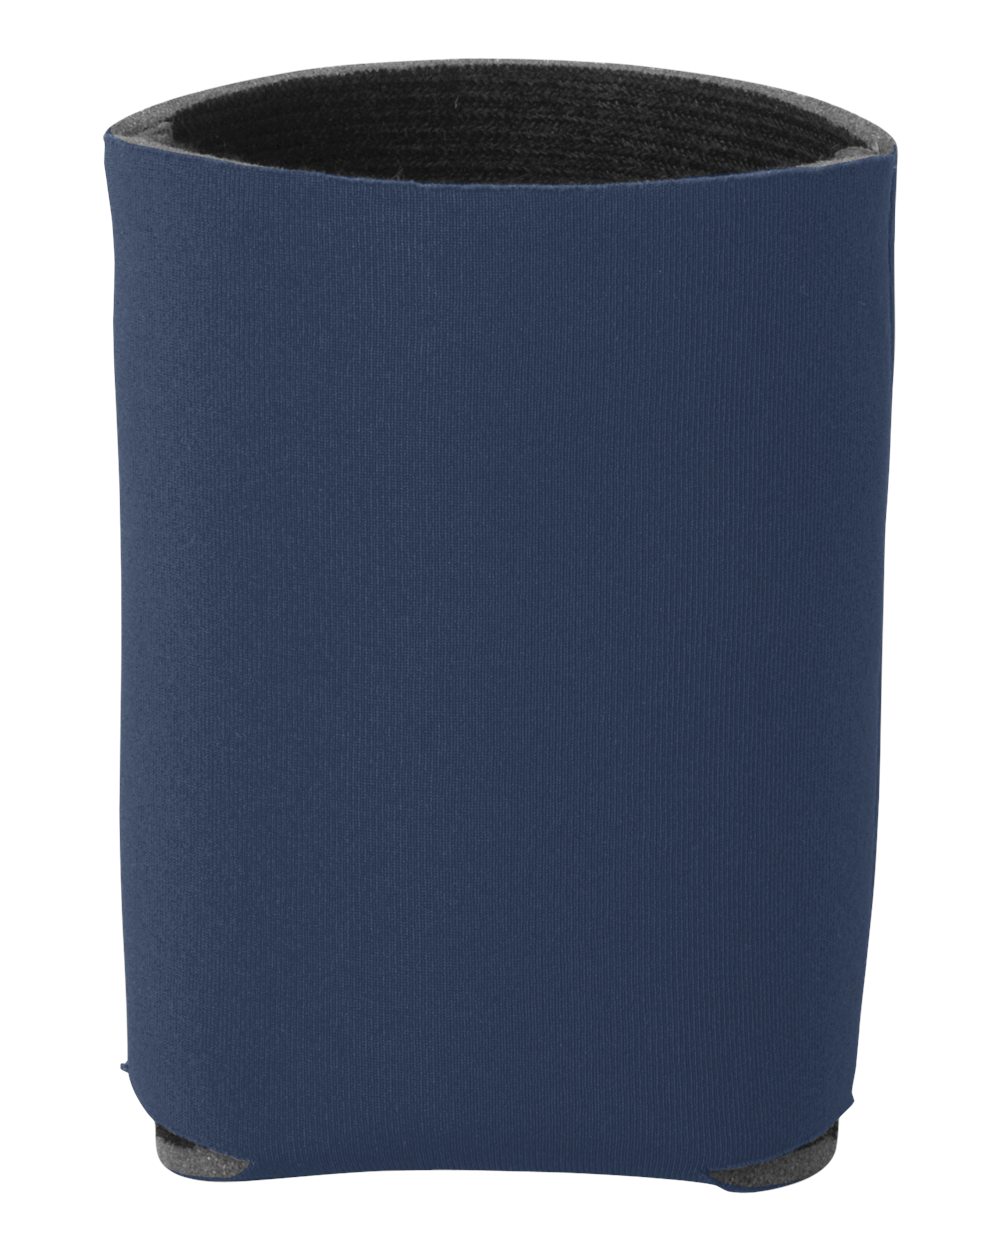 Foam Zone Collapsible Can Cooler with 1 color imprint